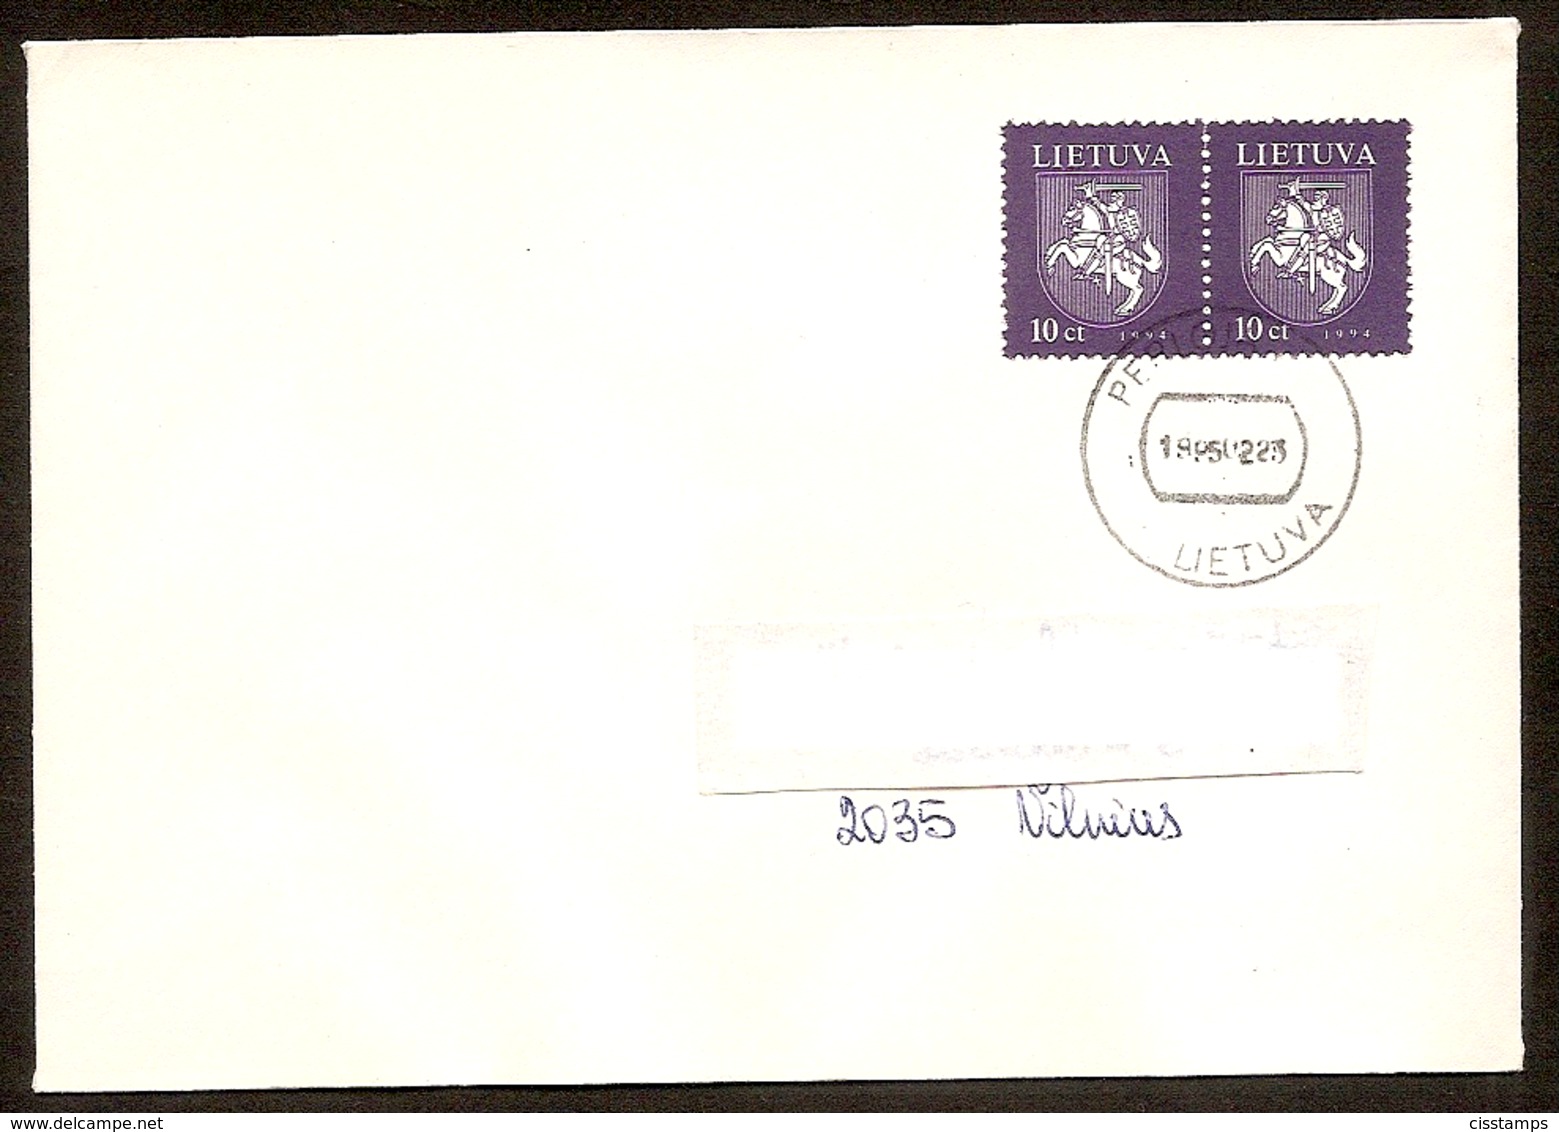 LITHUANIA / LITAUEN 1994 Definitive Horseman / Reiter /Mi554 (first Printing) Letter Posted In LIT From PERLOJA - Lithuania